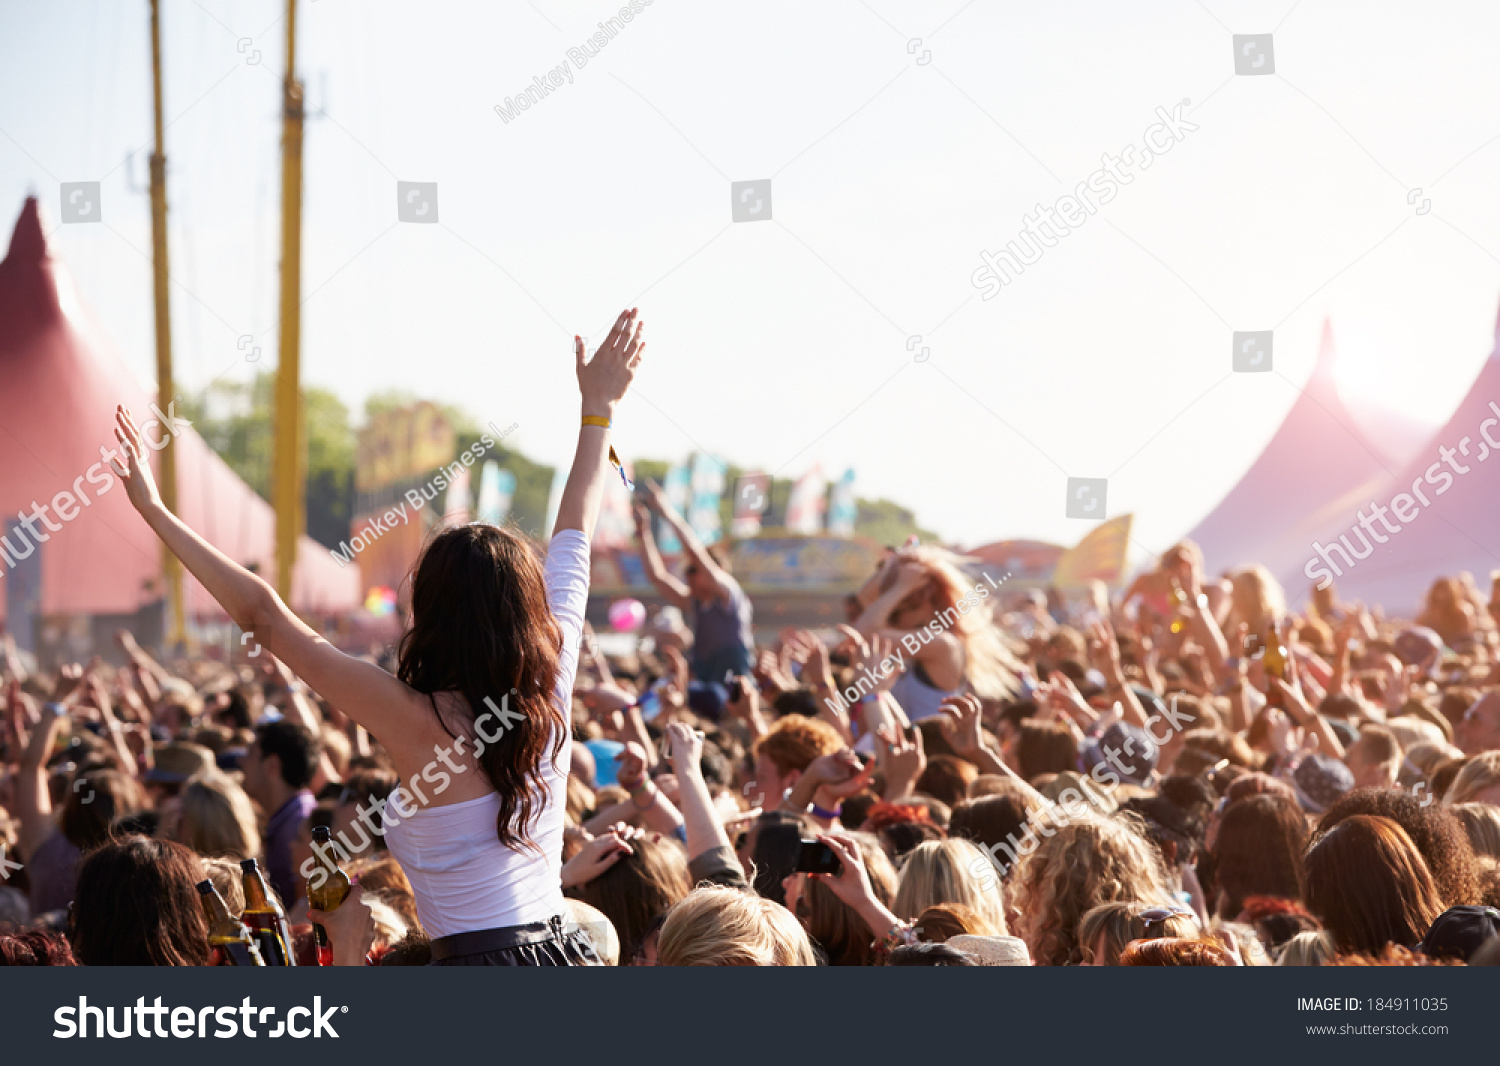 Crowds Enjoying Themselves At Outdoor Music Festival #184911035